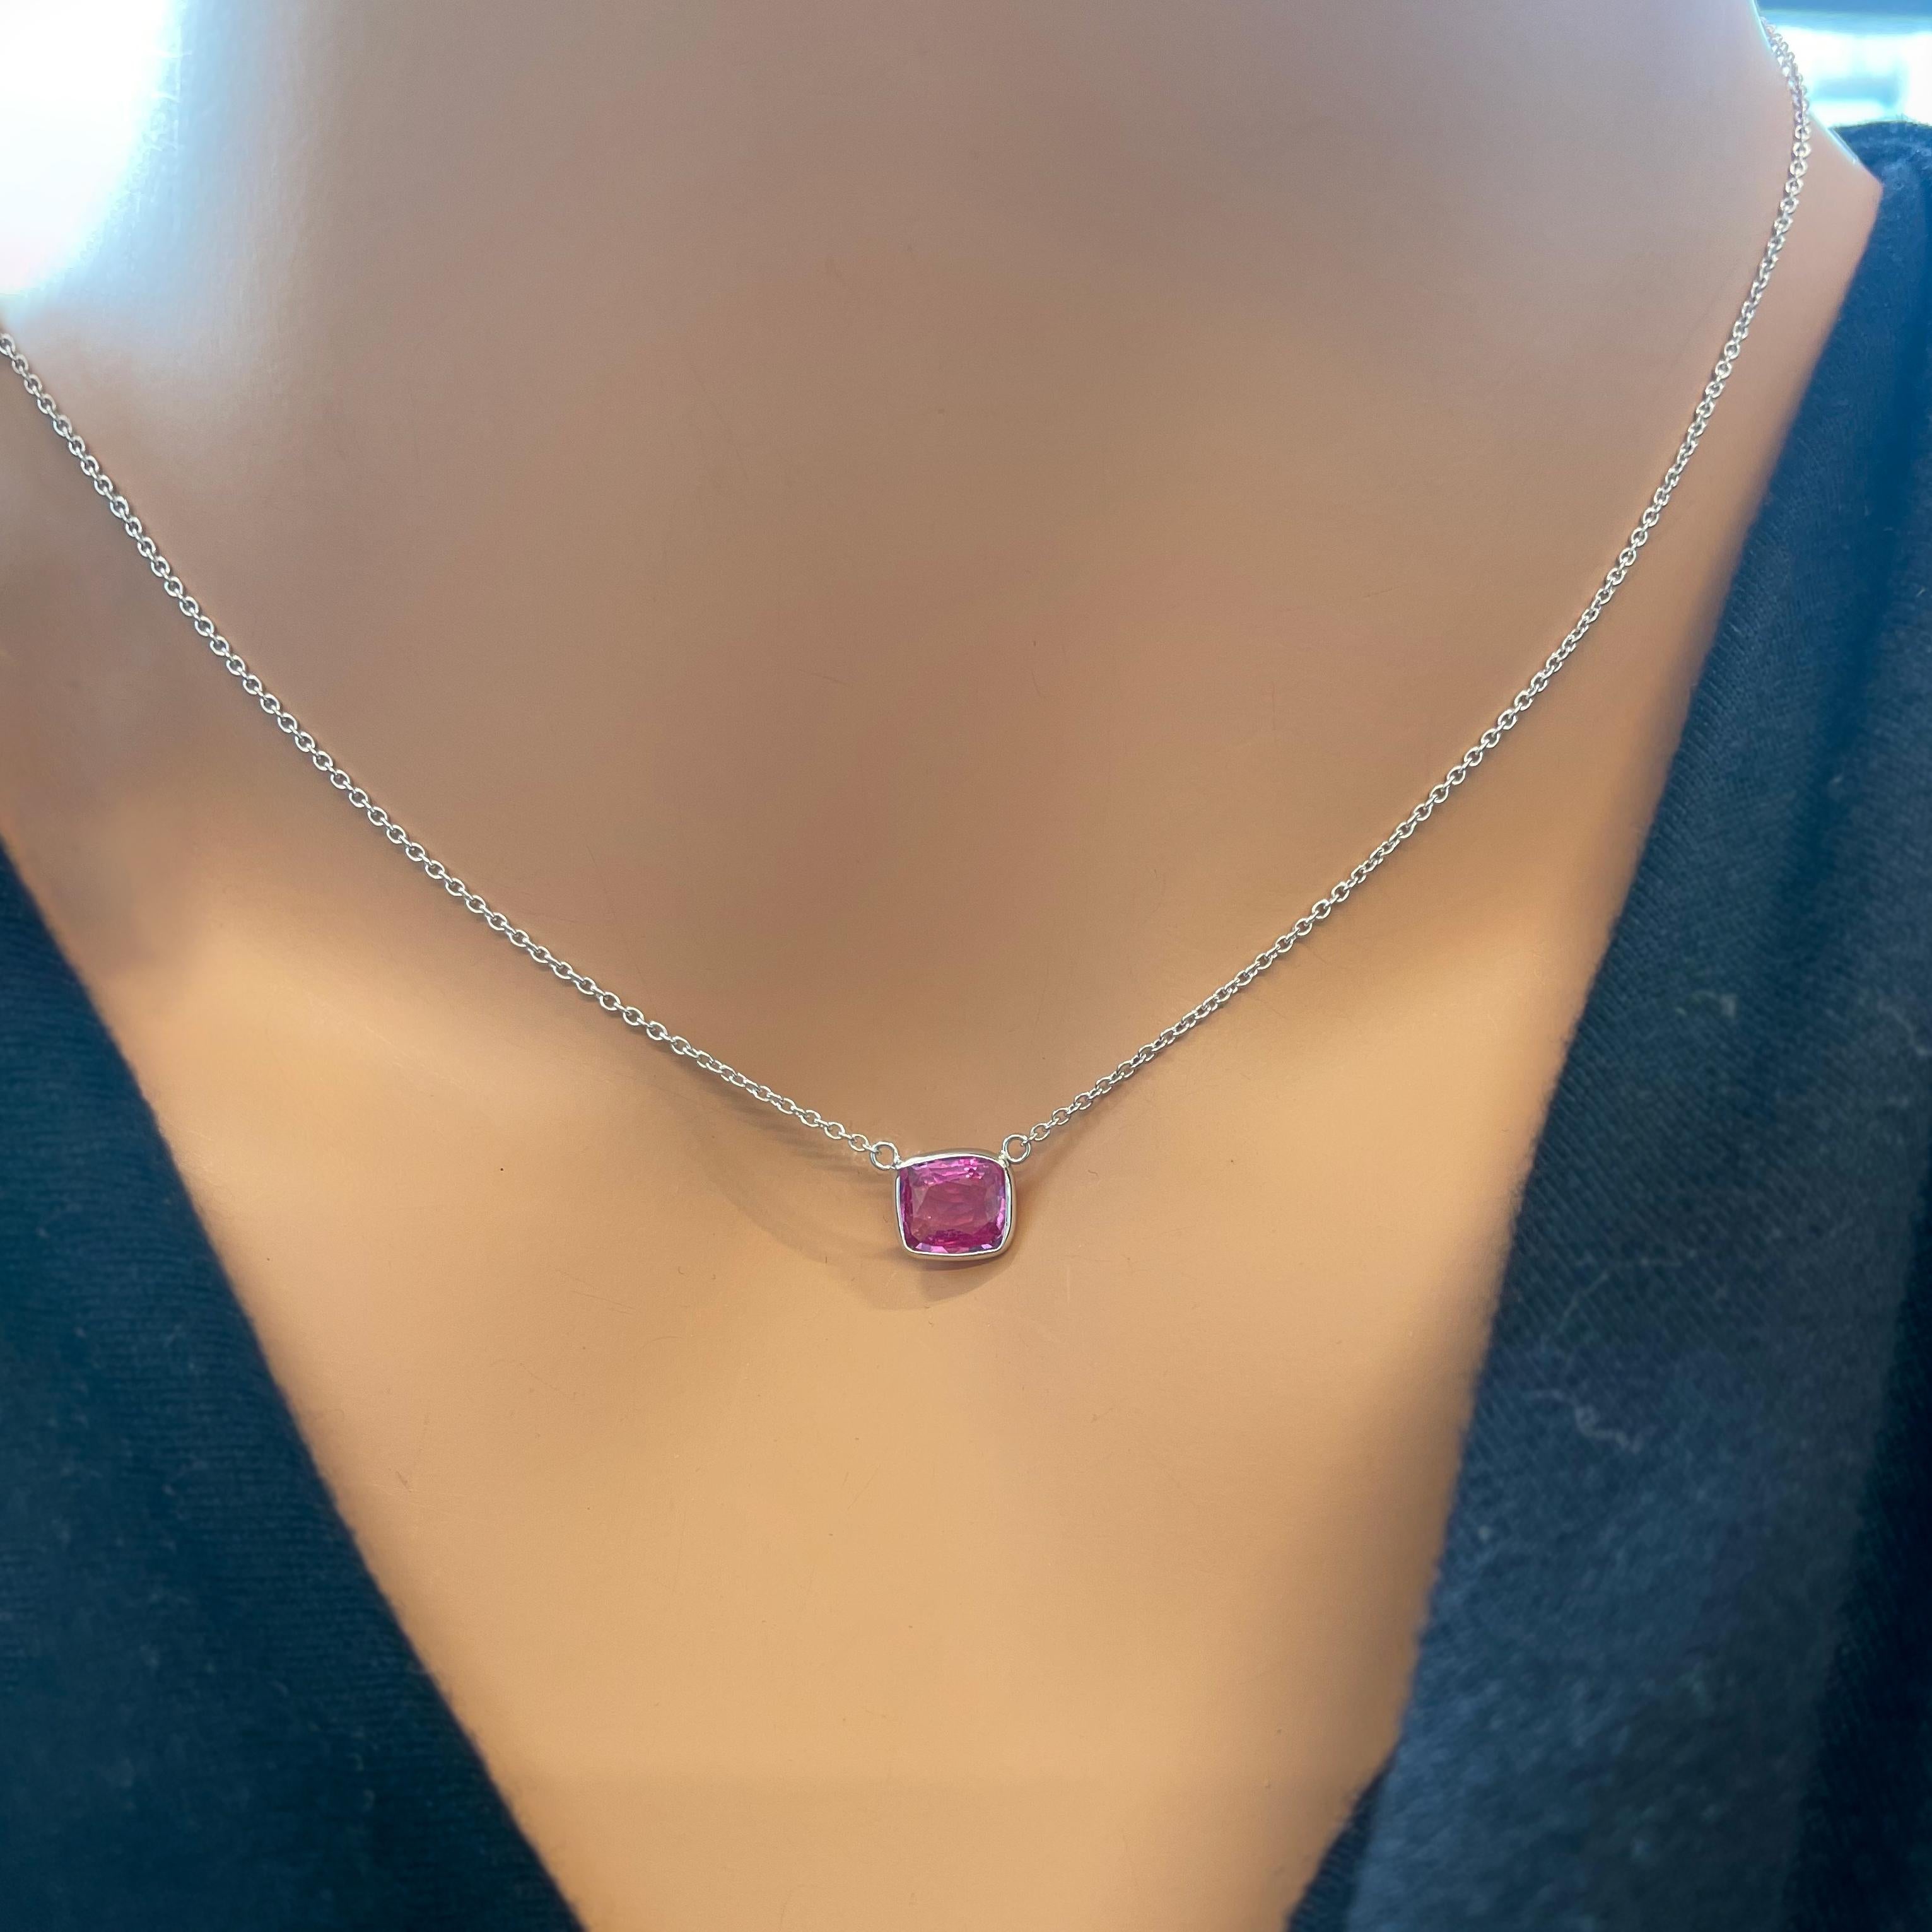 A fashion necklace featuring a pink cushion-cut sapphire with a weight of 1.60 carats can be a beautiful and stylish accessory. The necklace chain and setting can be made from various materials depending on your preference and budget. A 1.60-carat